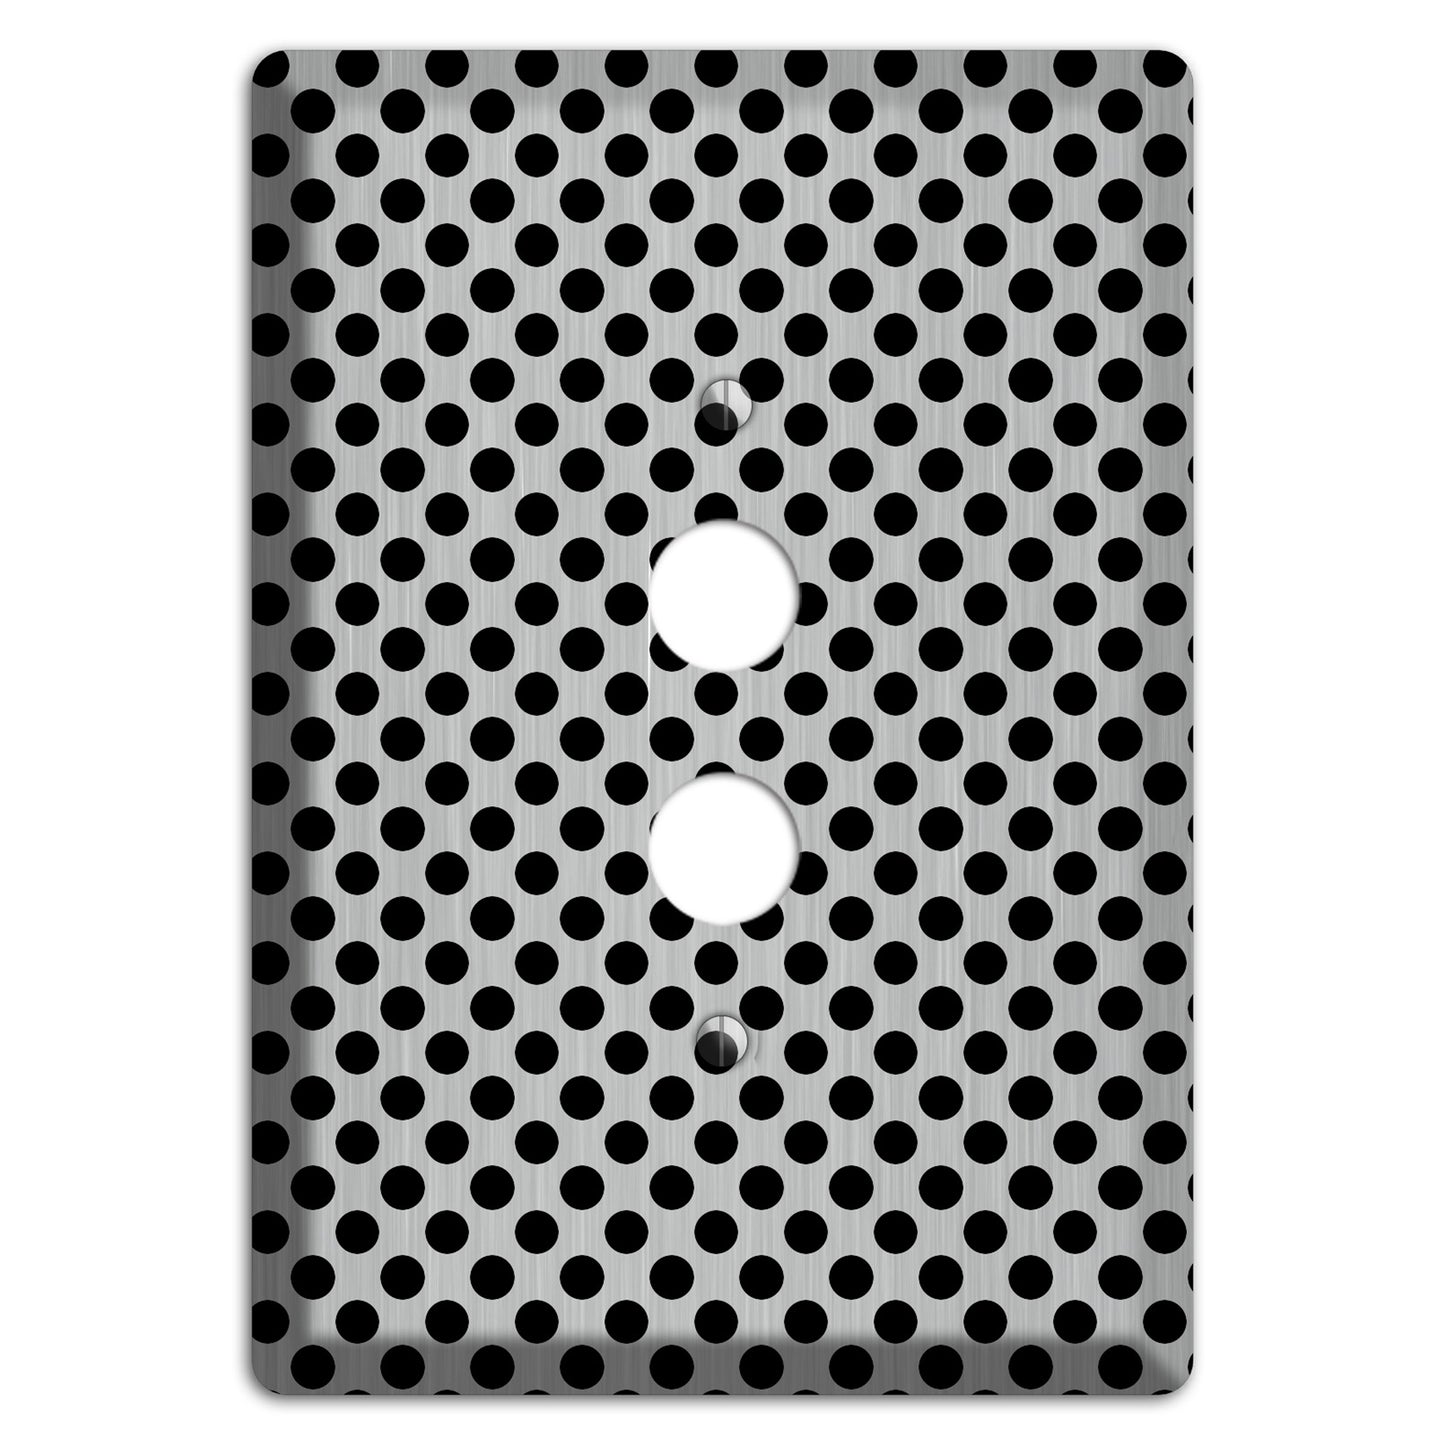 Packed Small Polka Dots Stainless 1 Pushbutton Wallplate